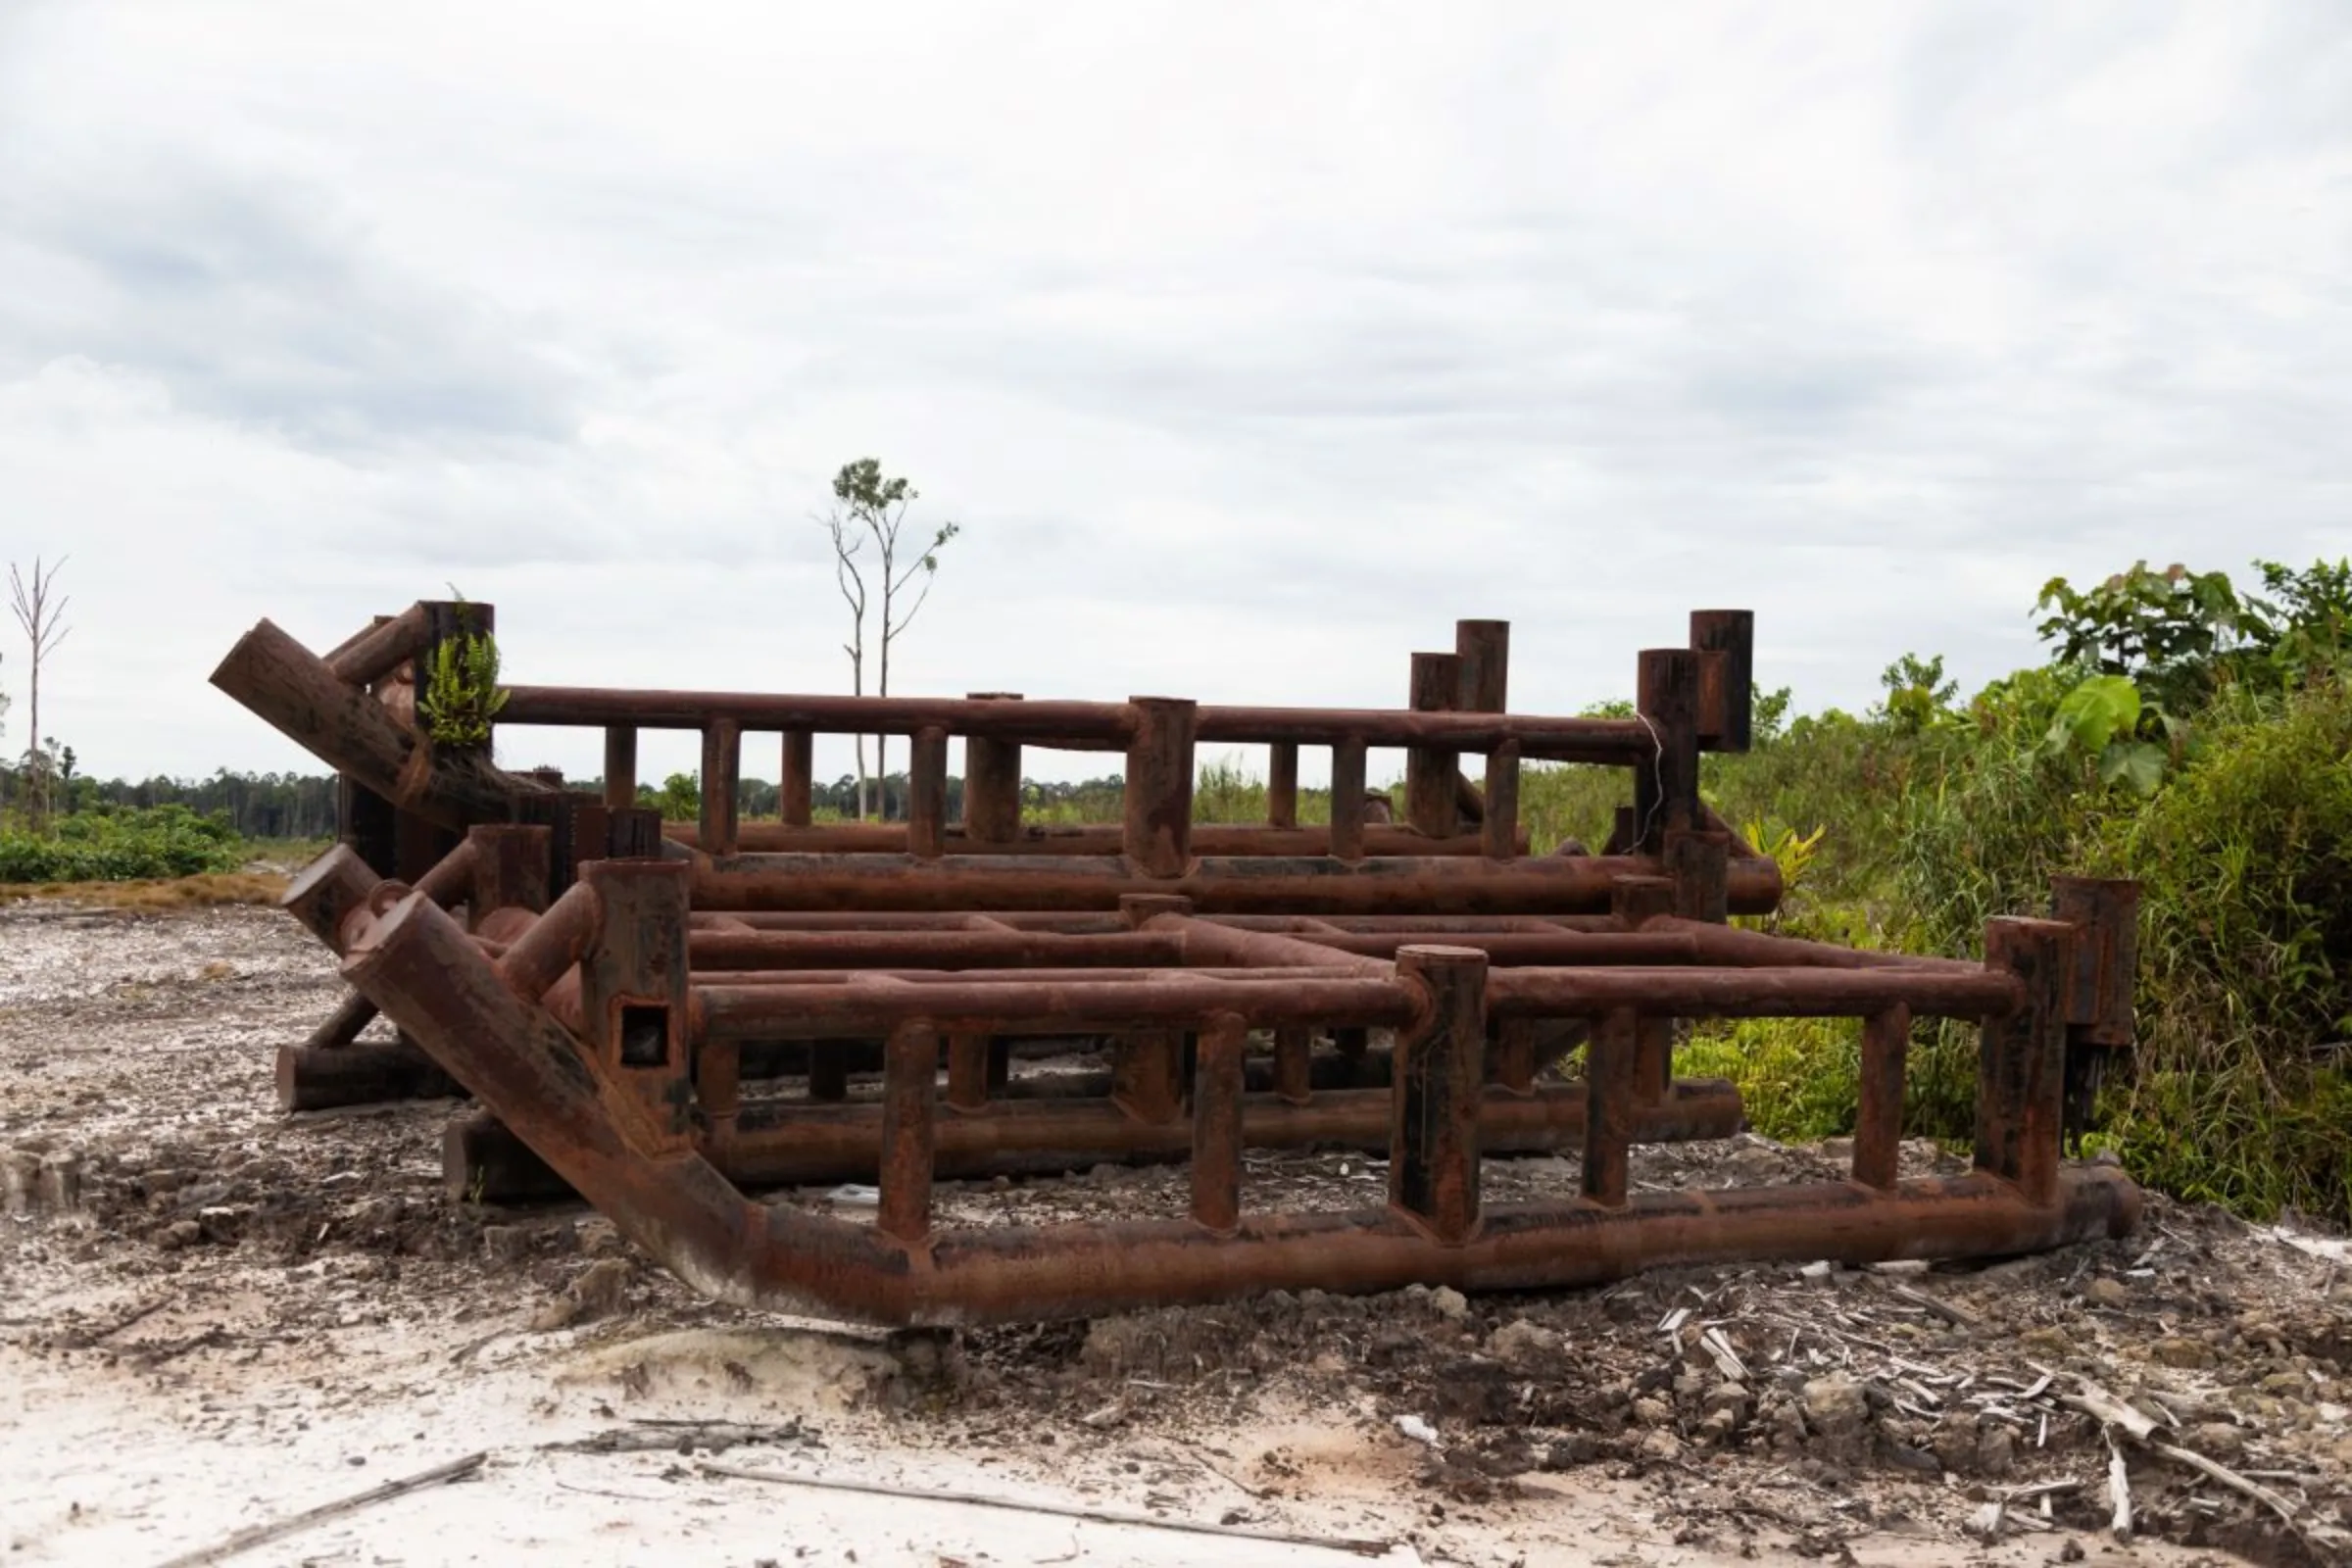 An abandoned rusty machine structure in the food estate zone in Central Kalimantan, Indonesia June 20, 2023. The central government initiated a food security program in 2020 to grow cassava in this area but the project has stopped. Thomson Reuters Foundation/Irene Barlian